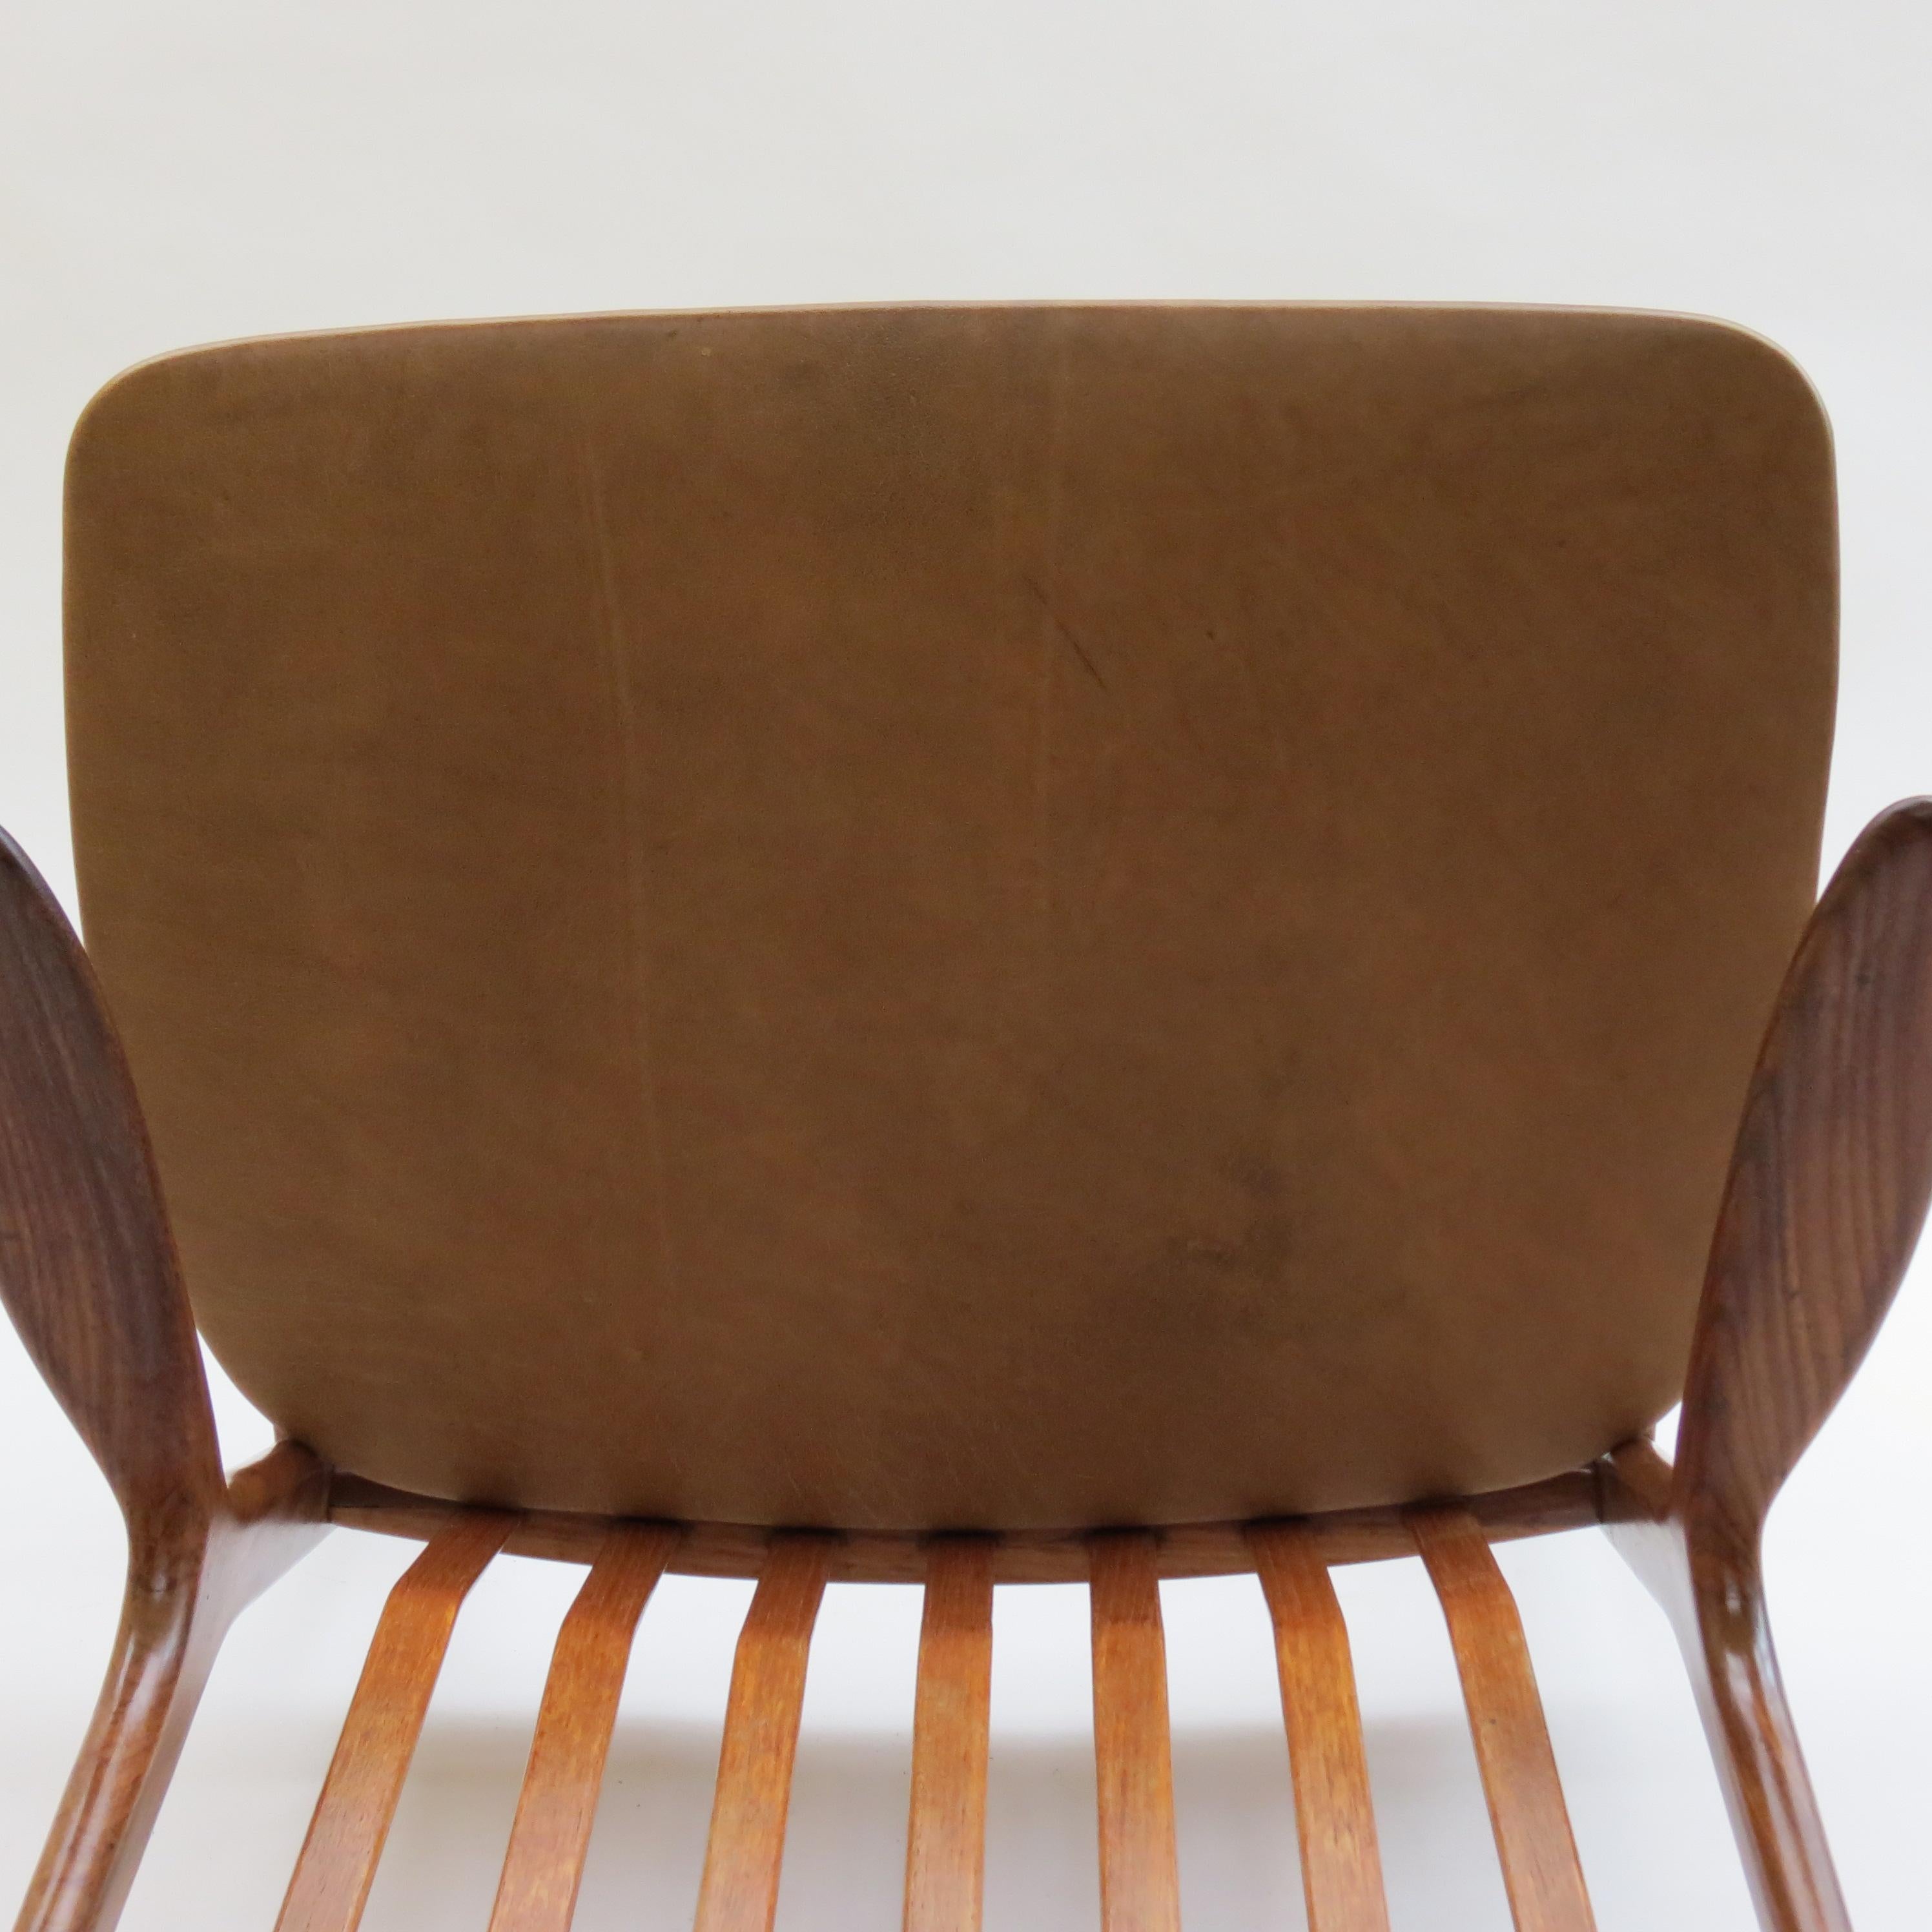 Midcentury Danish Chair by Svend Madsen 1960s Teak with Leather Seat 8